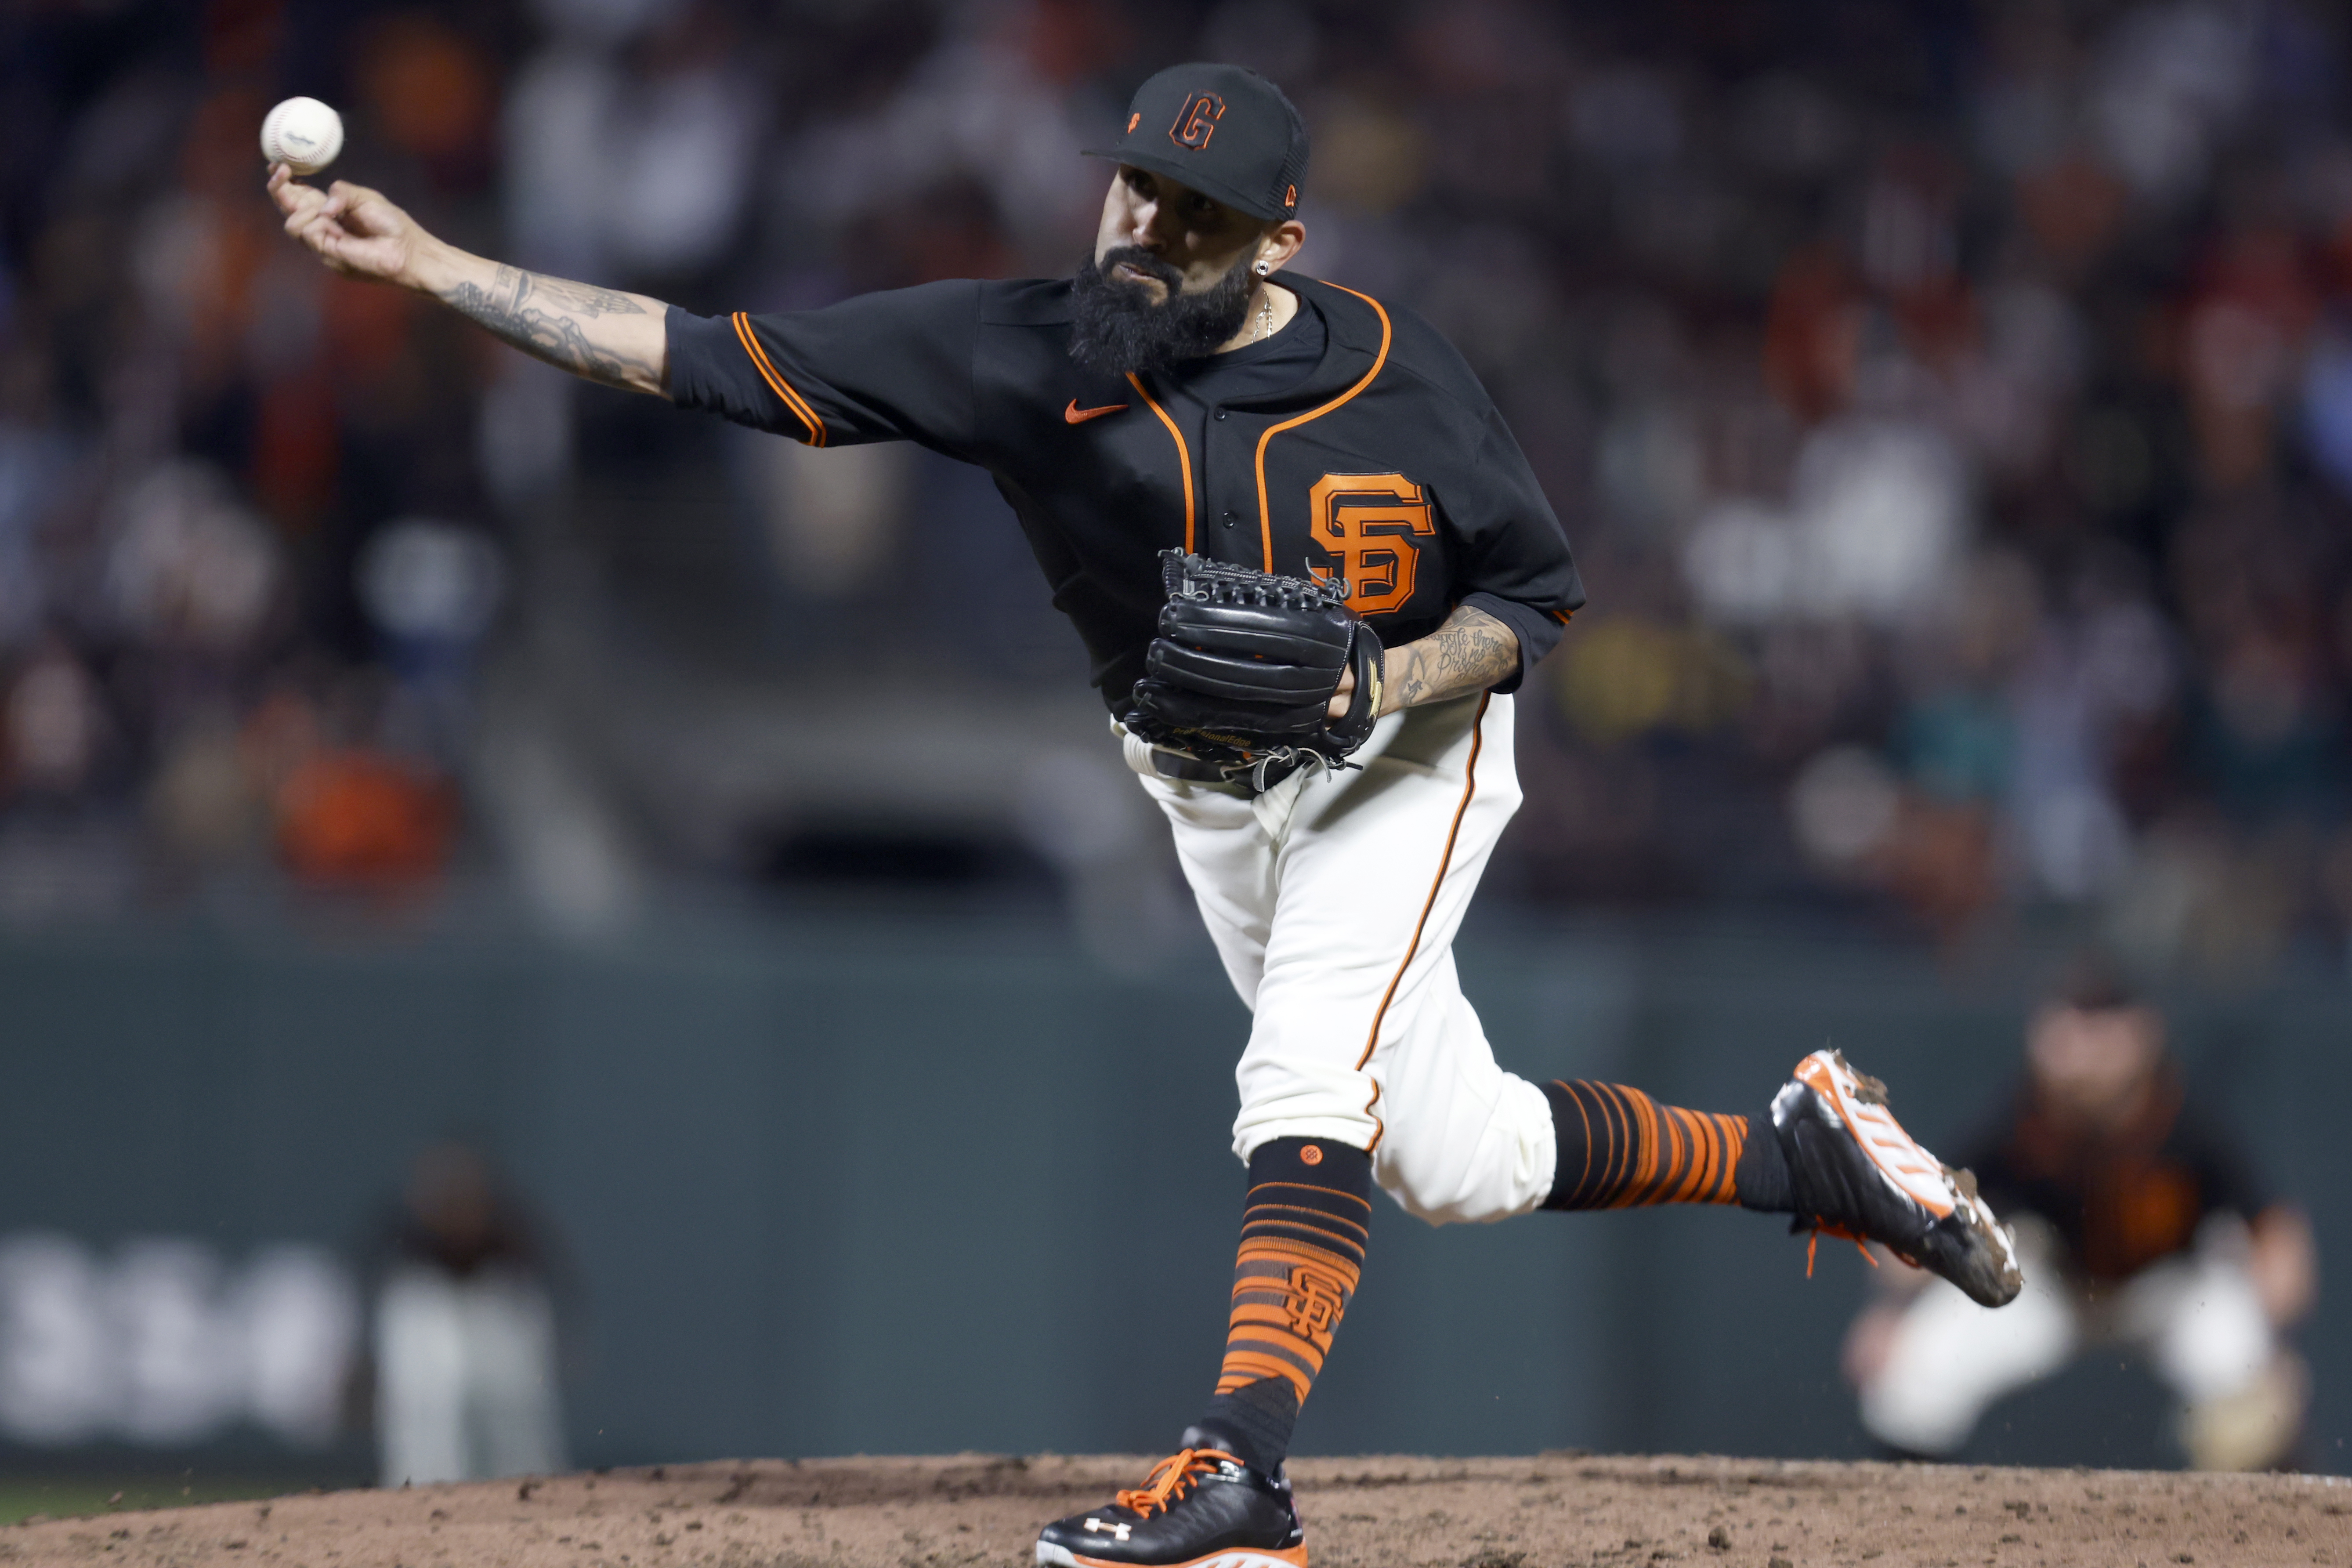 Sergio Romo throws an emotional last ball for the Giants as he